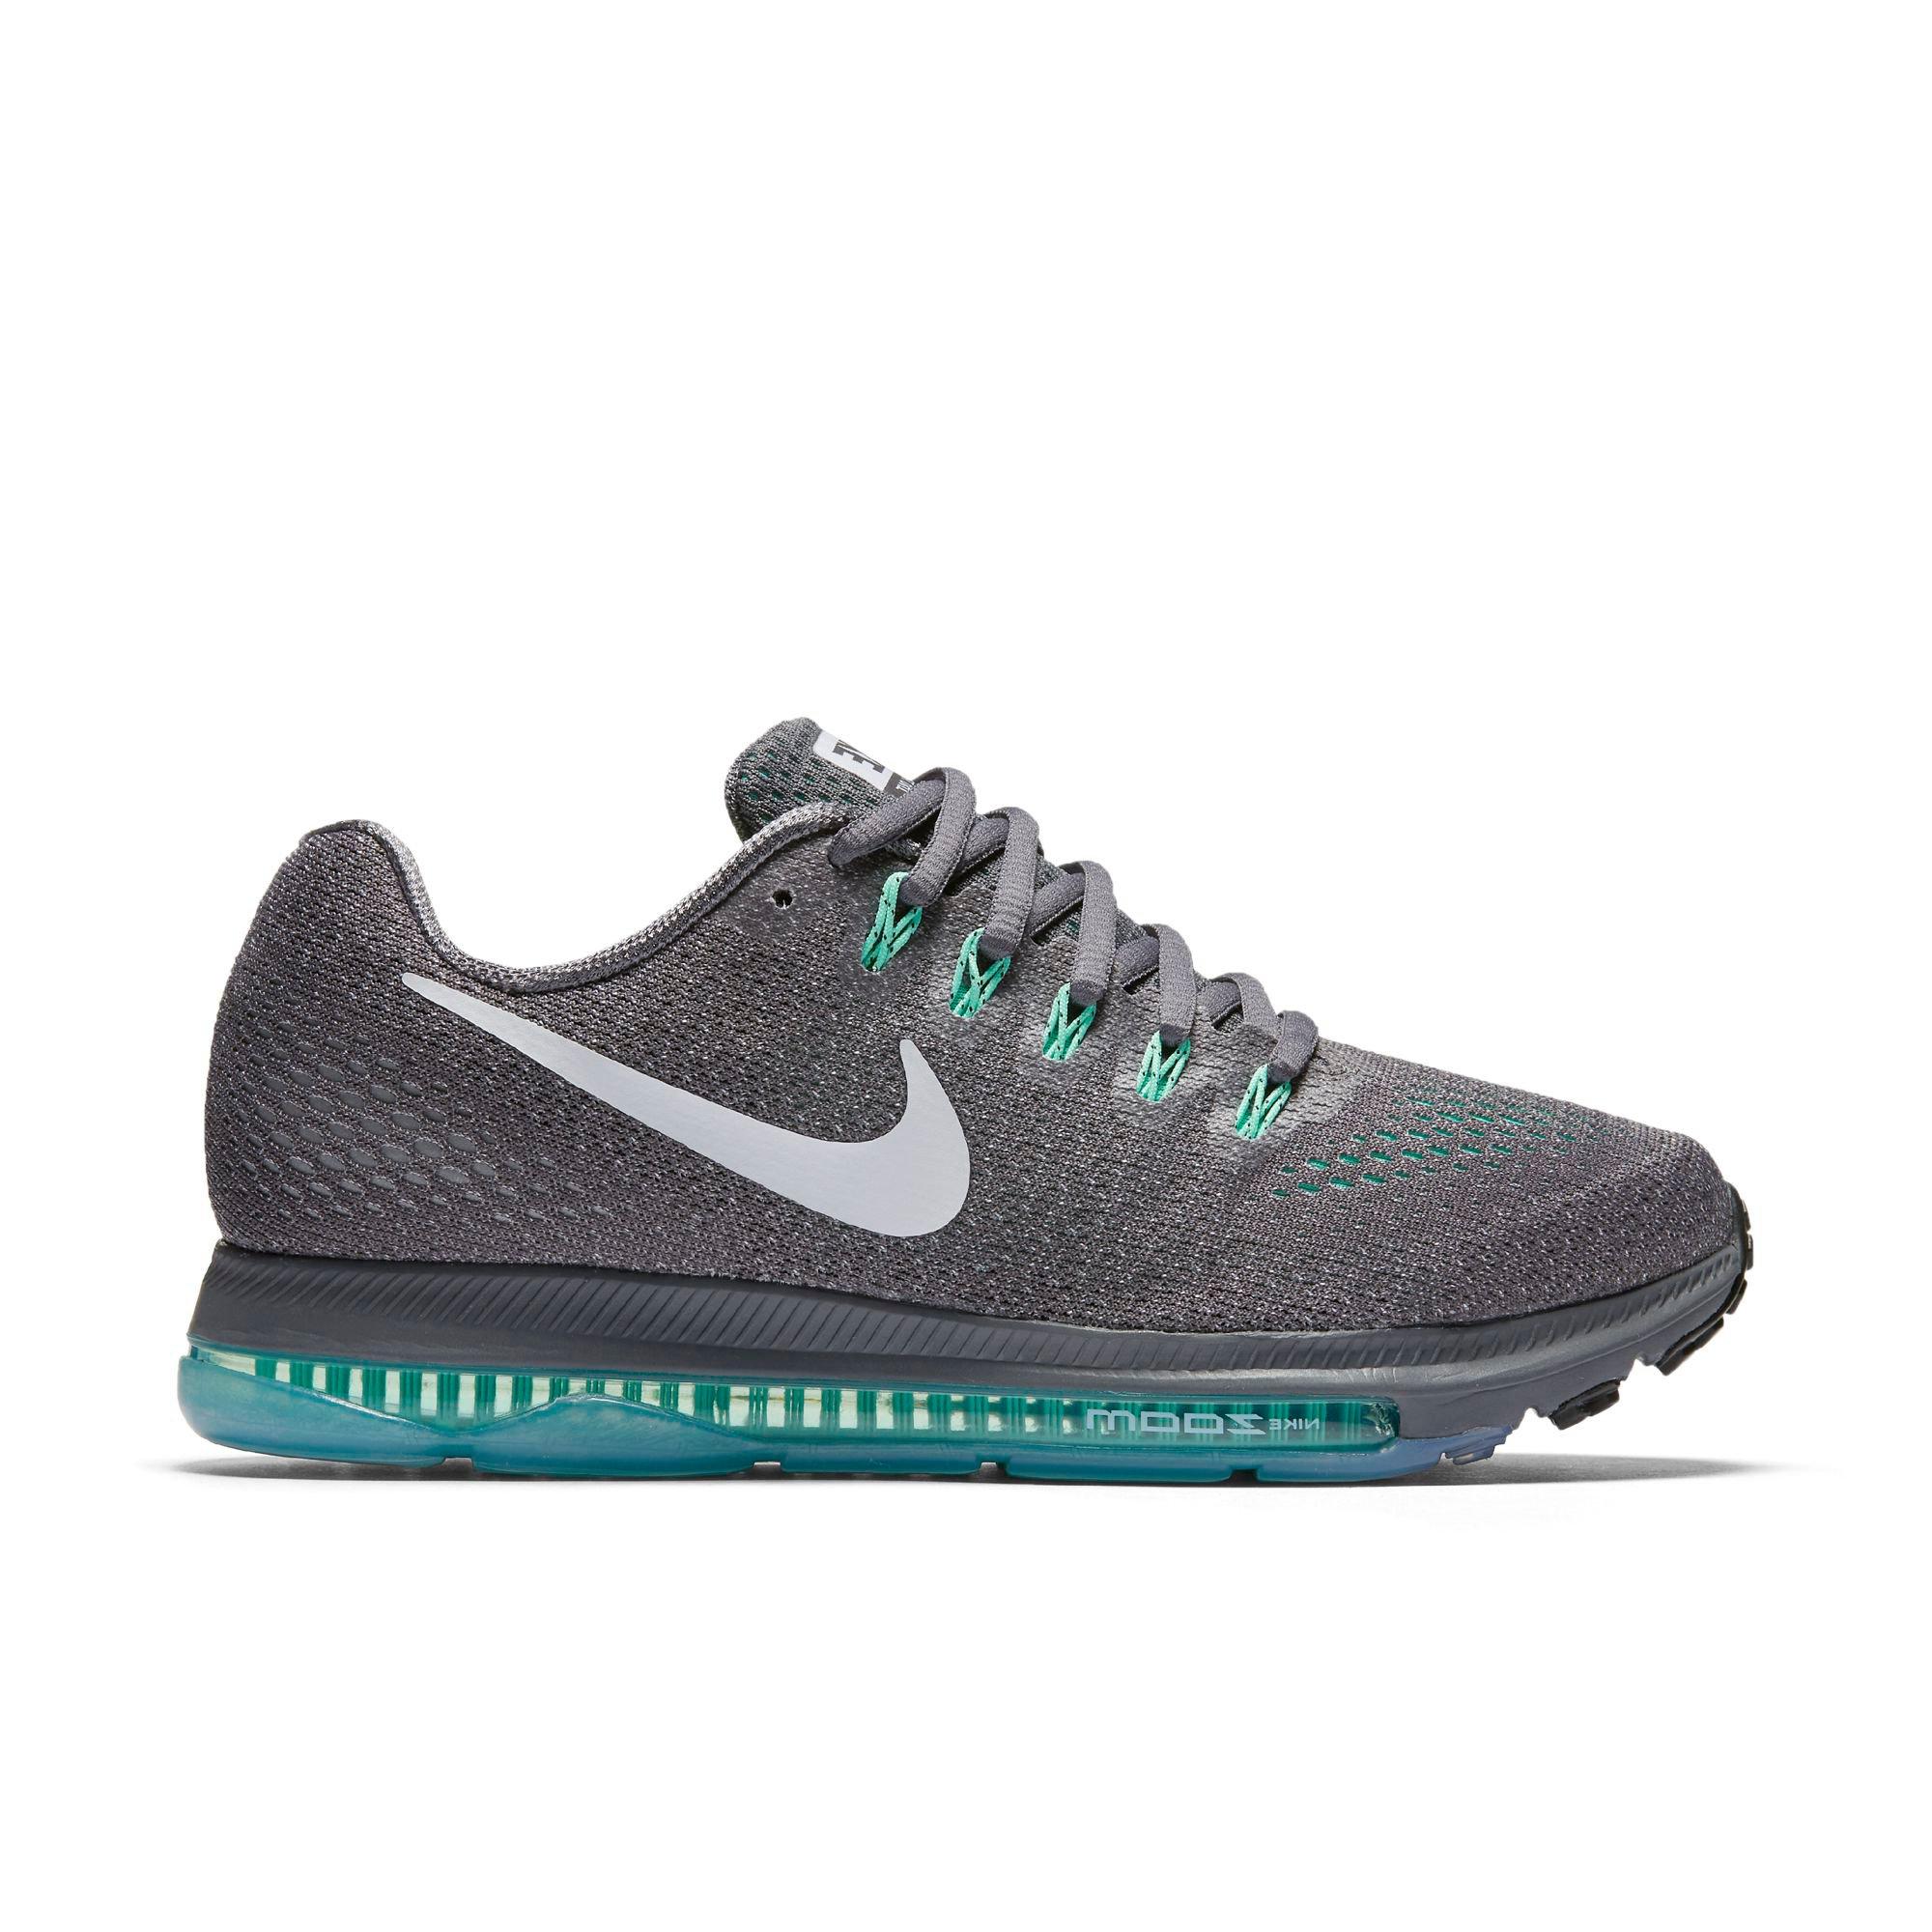 nike zoom all out low women's running shoe